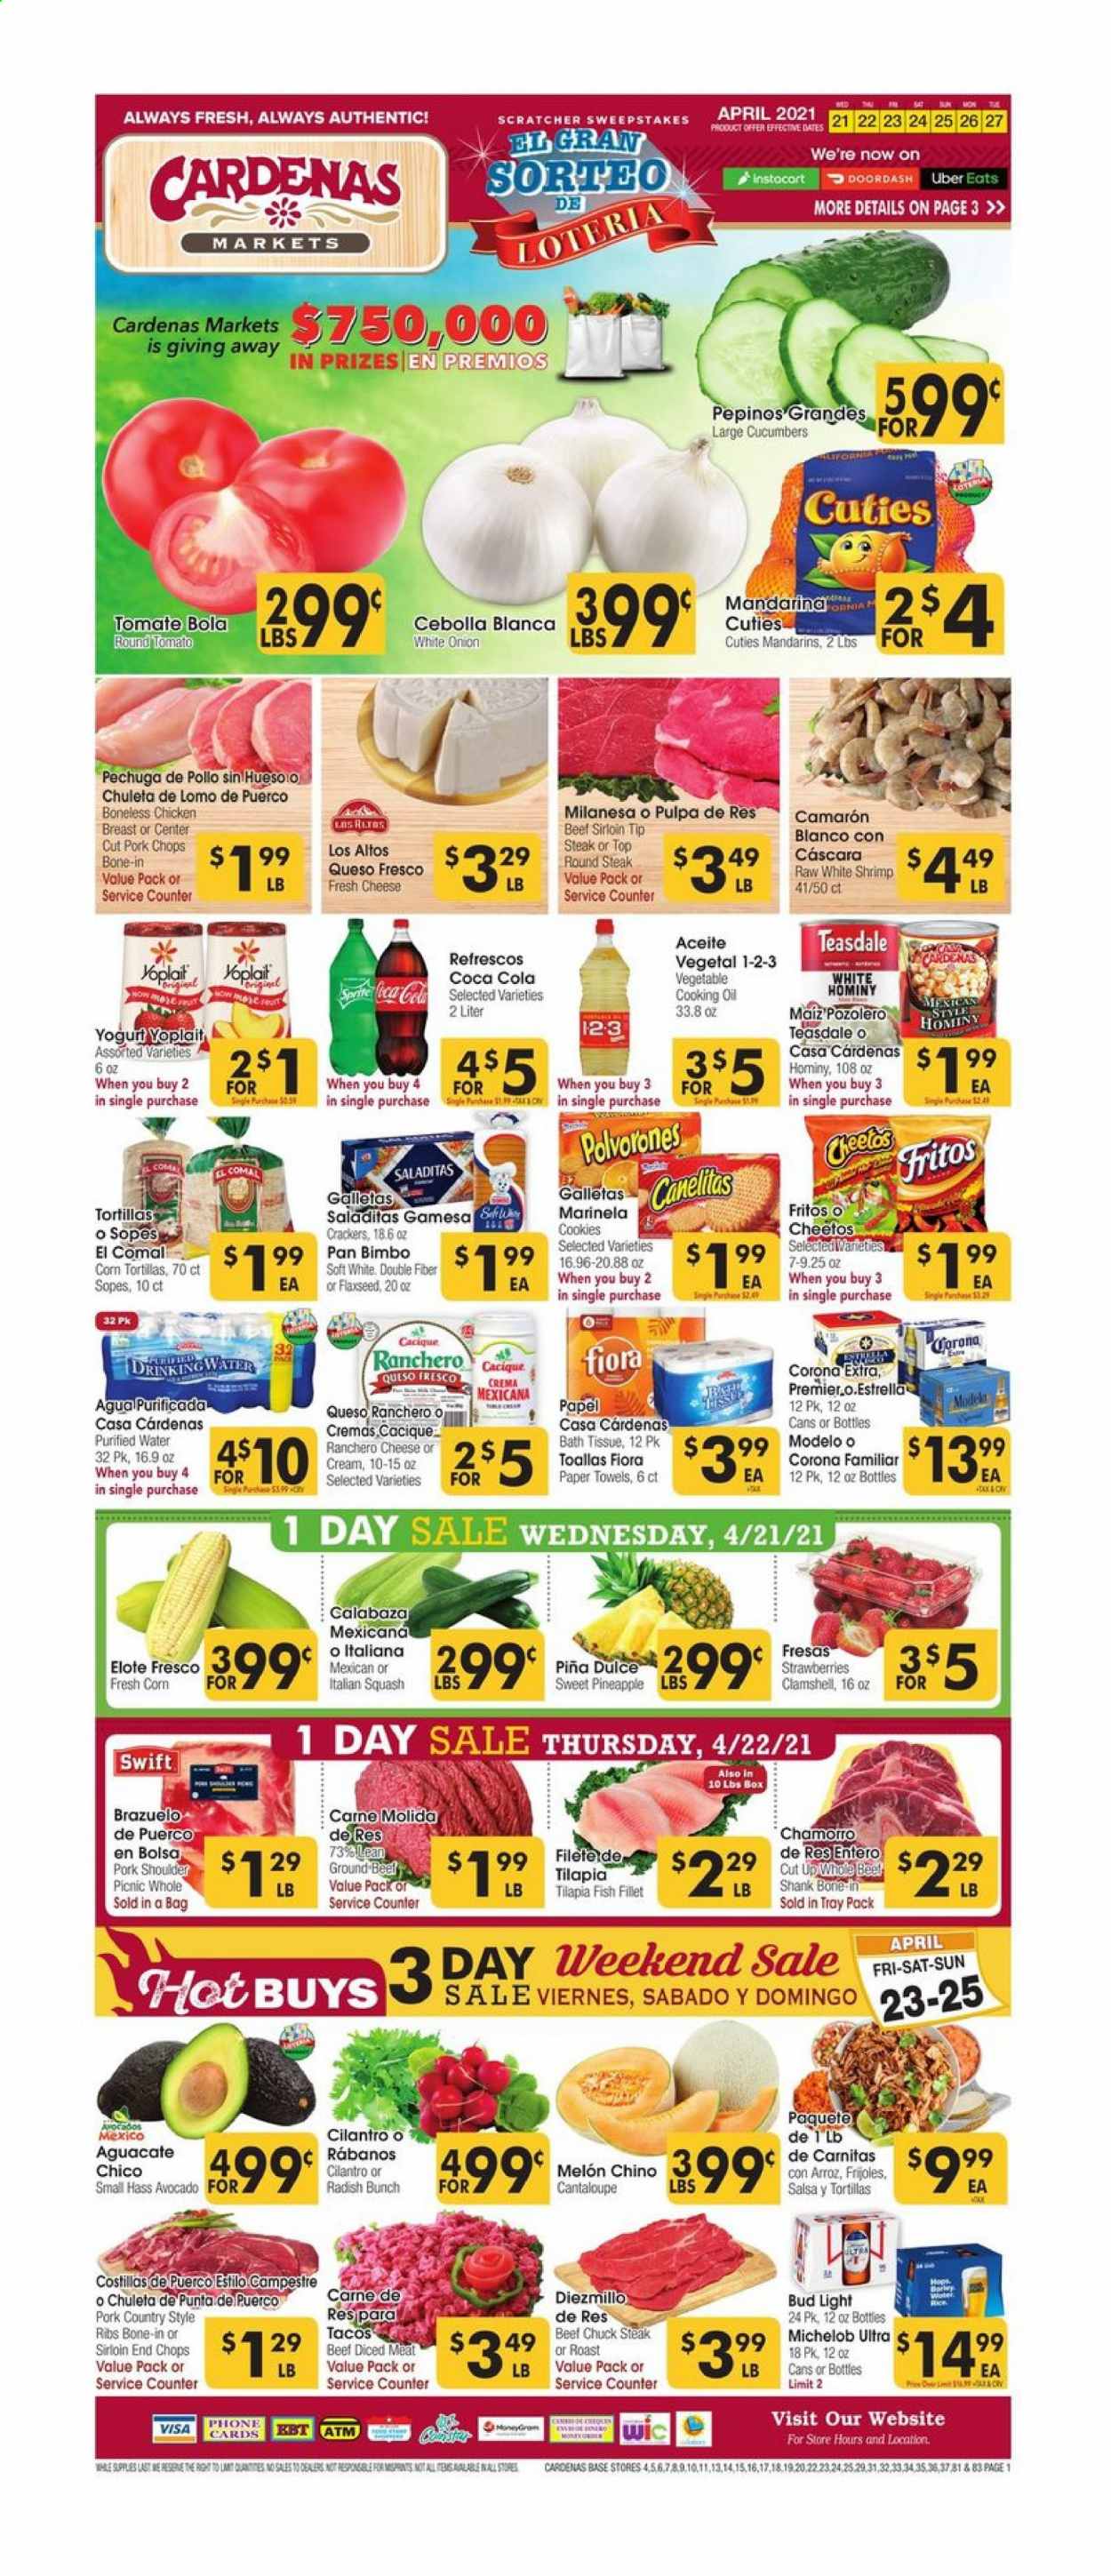 thumbnail - Cardenas Flyer - 04/21/2021 - 04/27/2021 - Sales products - corn tortillas, tortillas, cantaloupe, cucumber, radishes, avocado, mandarines, strawberries, fish fillets, tilapia, fish, shrimps, queso fresco, yoghurt, Yoplait, cookies, crackers, Fritos, Cheetos, Ace, rice, cilantro, salsa, oil, Coca-Cola, Sprite, purified water, beer, Michelob, Bud Light, Corona Extra, Modelo, chicken breasts, beef meat, beef sirloin, ground beef, steak, round steak, chuck steak, pork chops, pork meat, pork ribs, pork shoulder, country style ribs, bath tissue, kitchen towels, paper towels, tray, pan, pineapple, melons. Page 1.